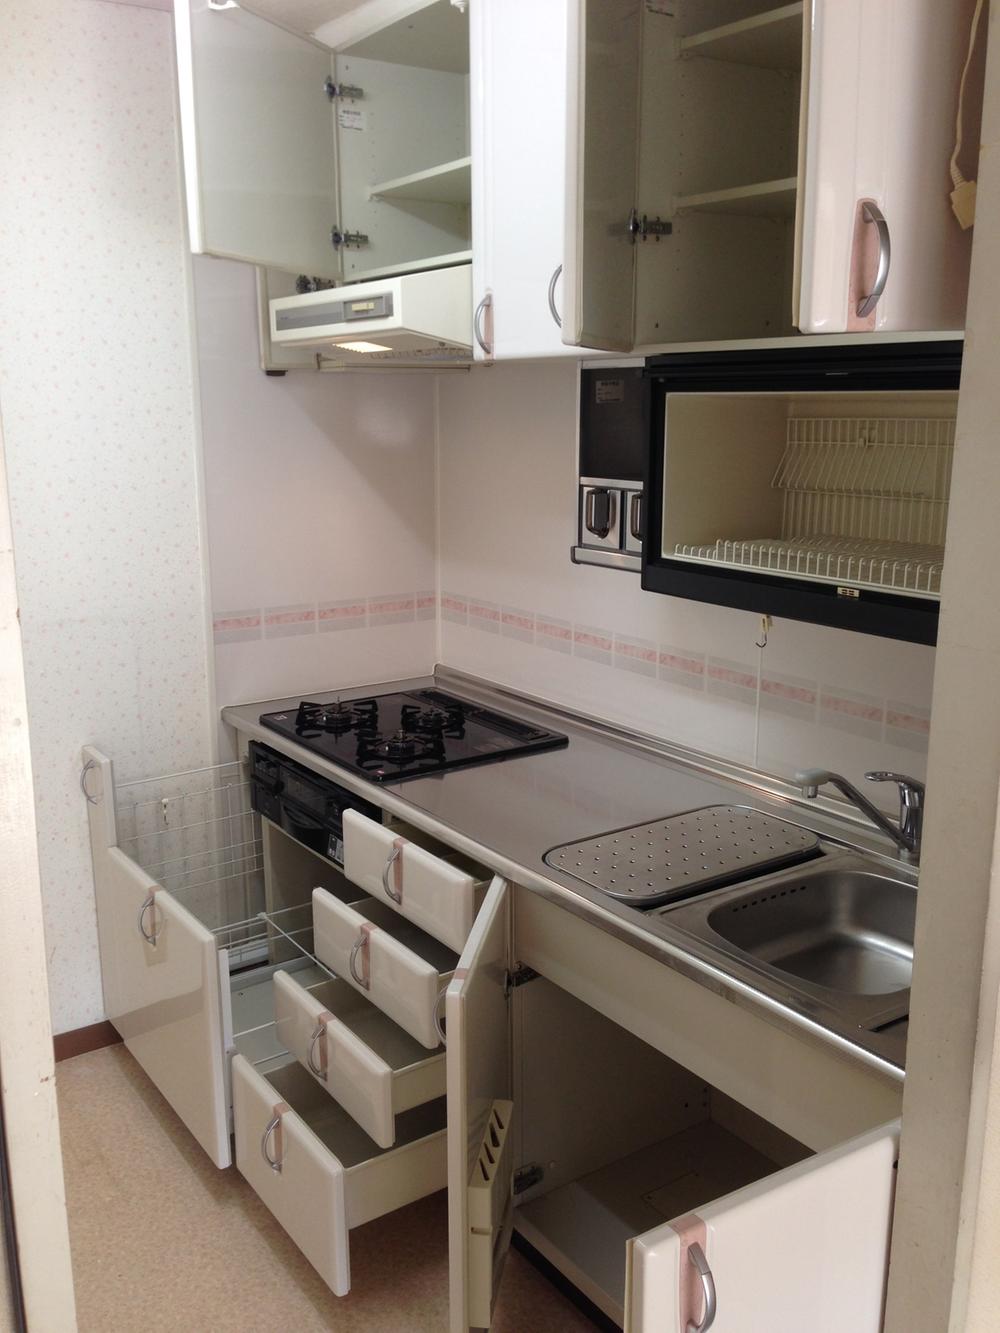 Kitchen. Six years ago Takara Standard Co., Ltd. of the system kitchen was replaced in. It is very beautiful after cleaning.